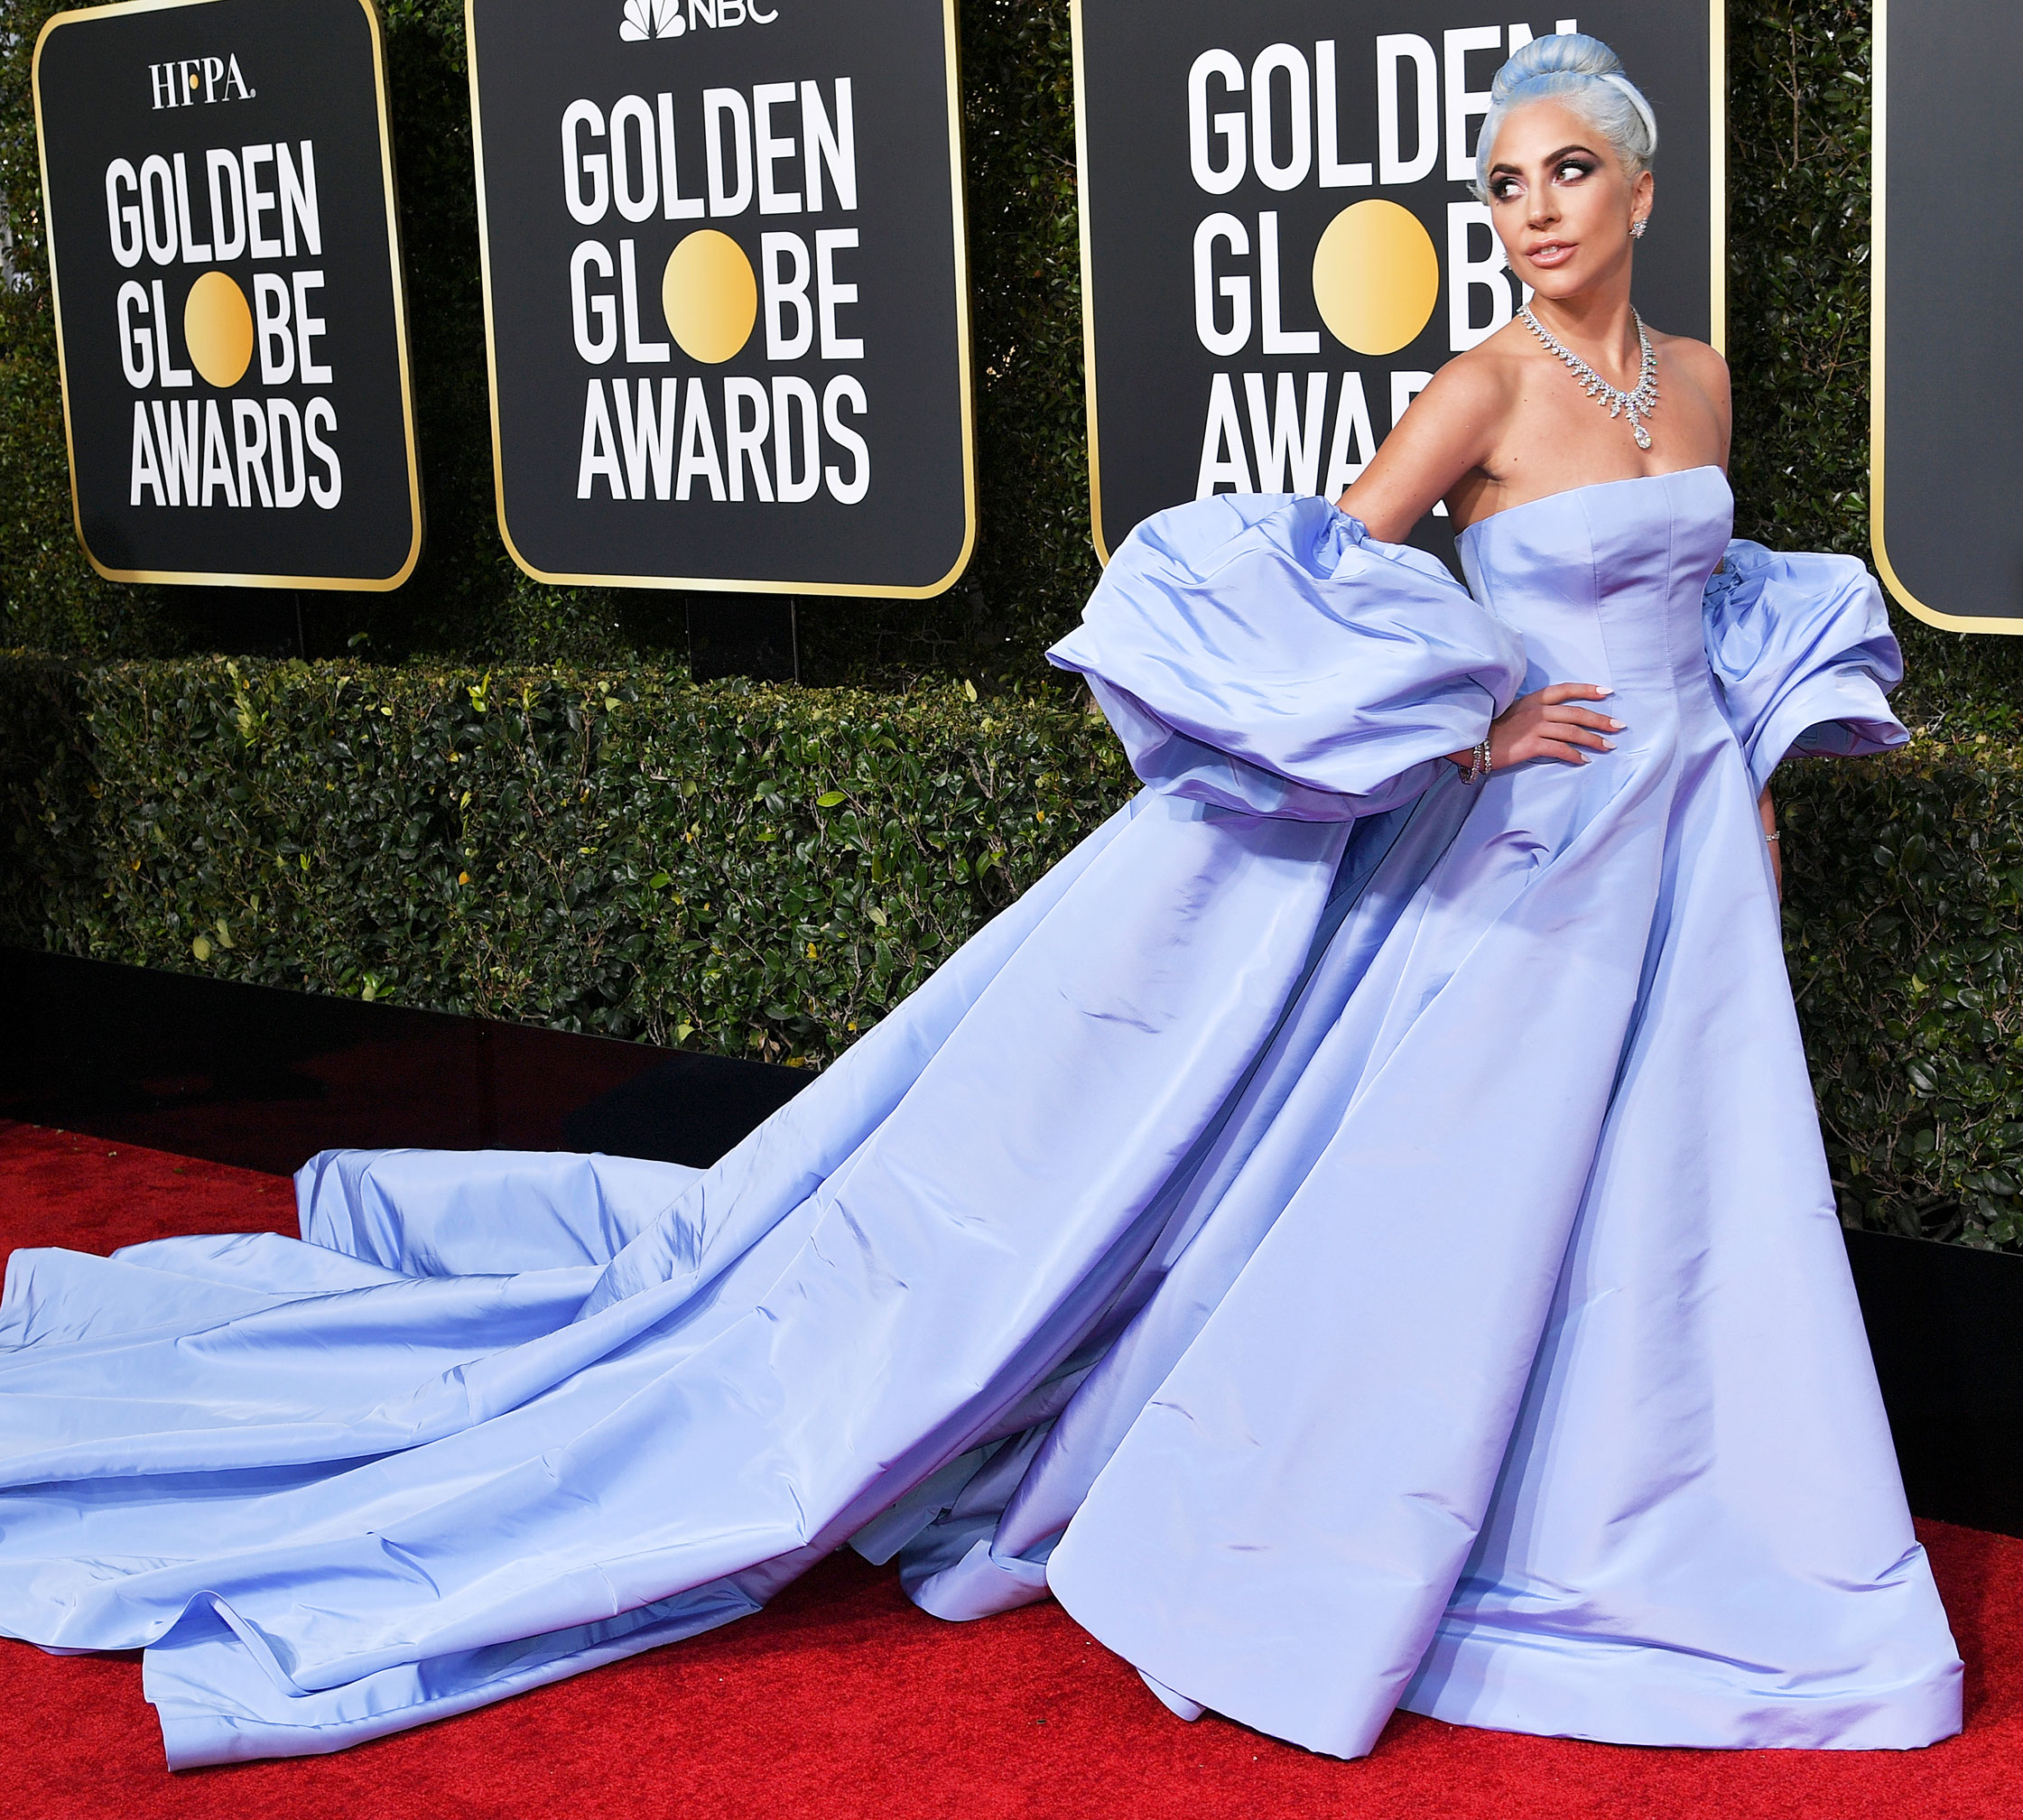 Lady Gaga Wears Silver Dress to Grammys 2019 Red Carpet